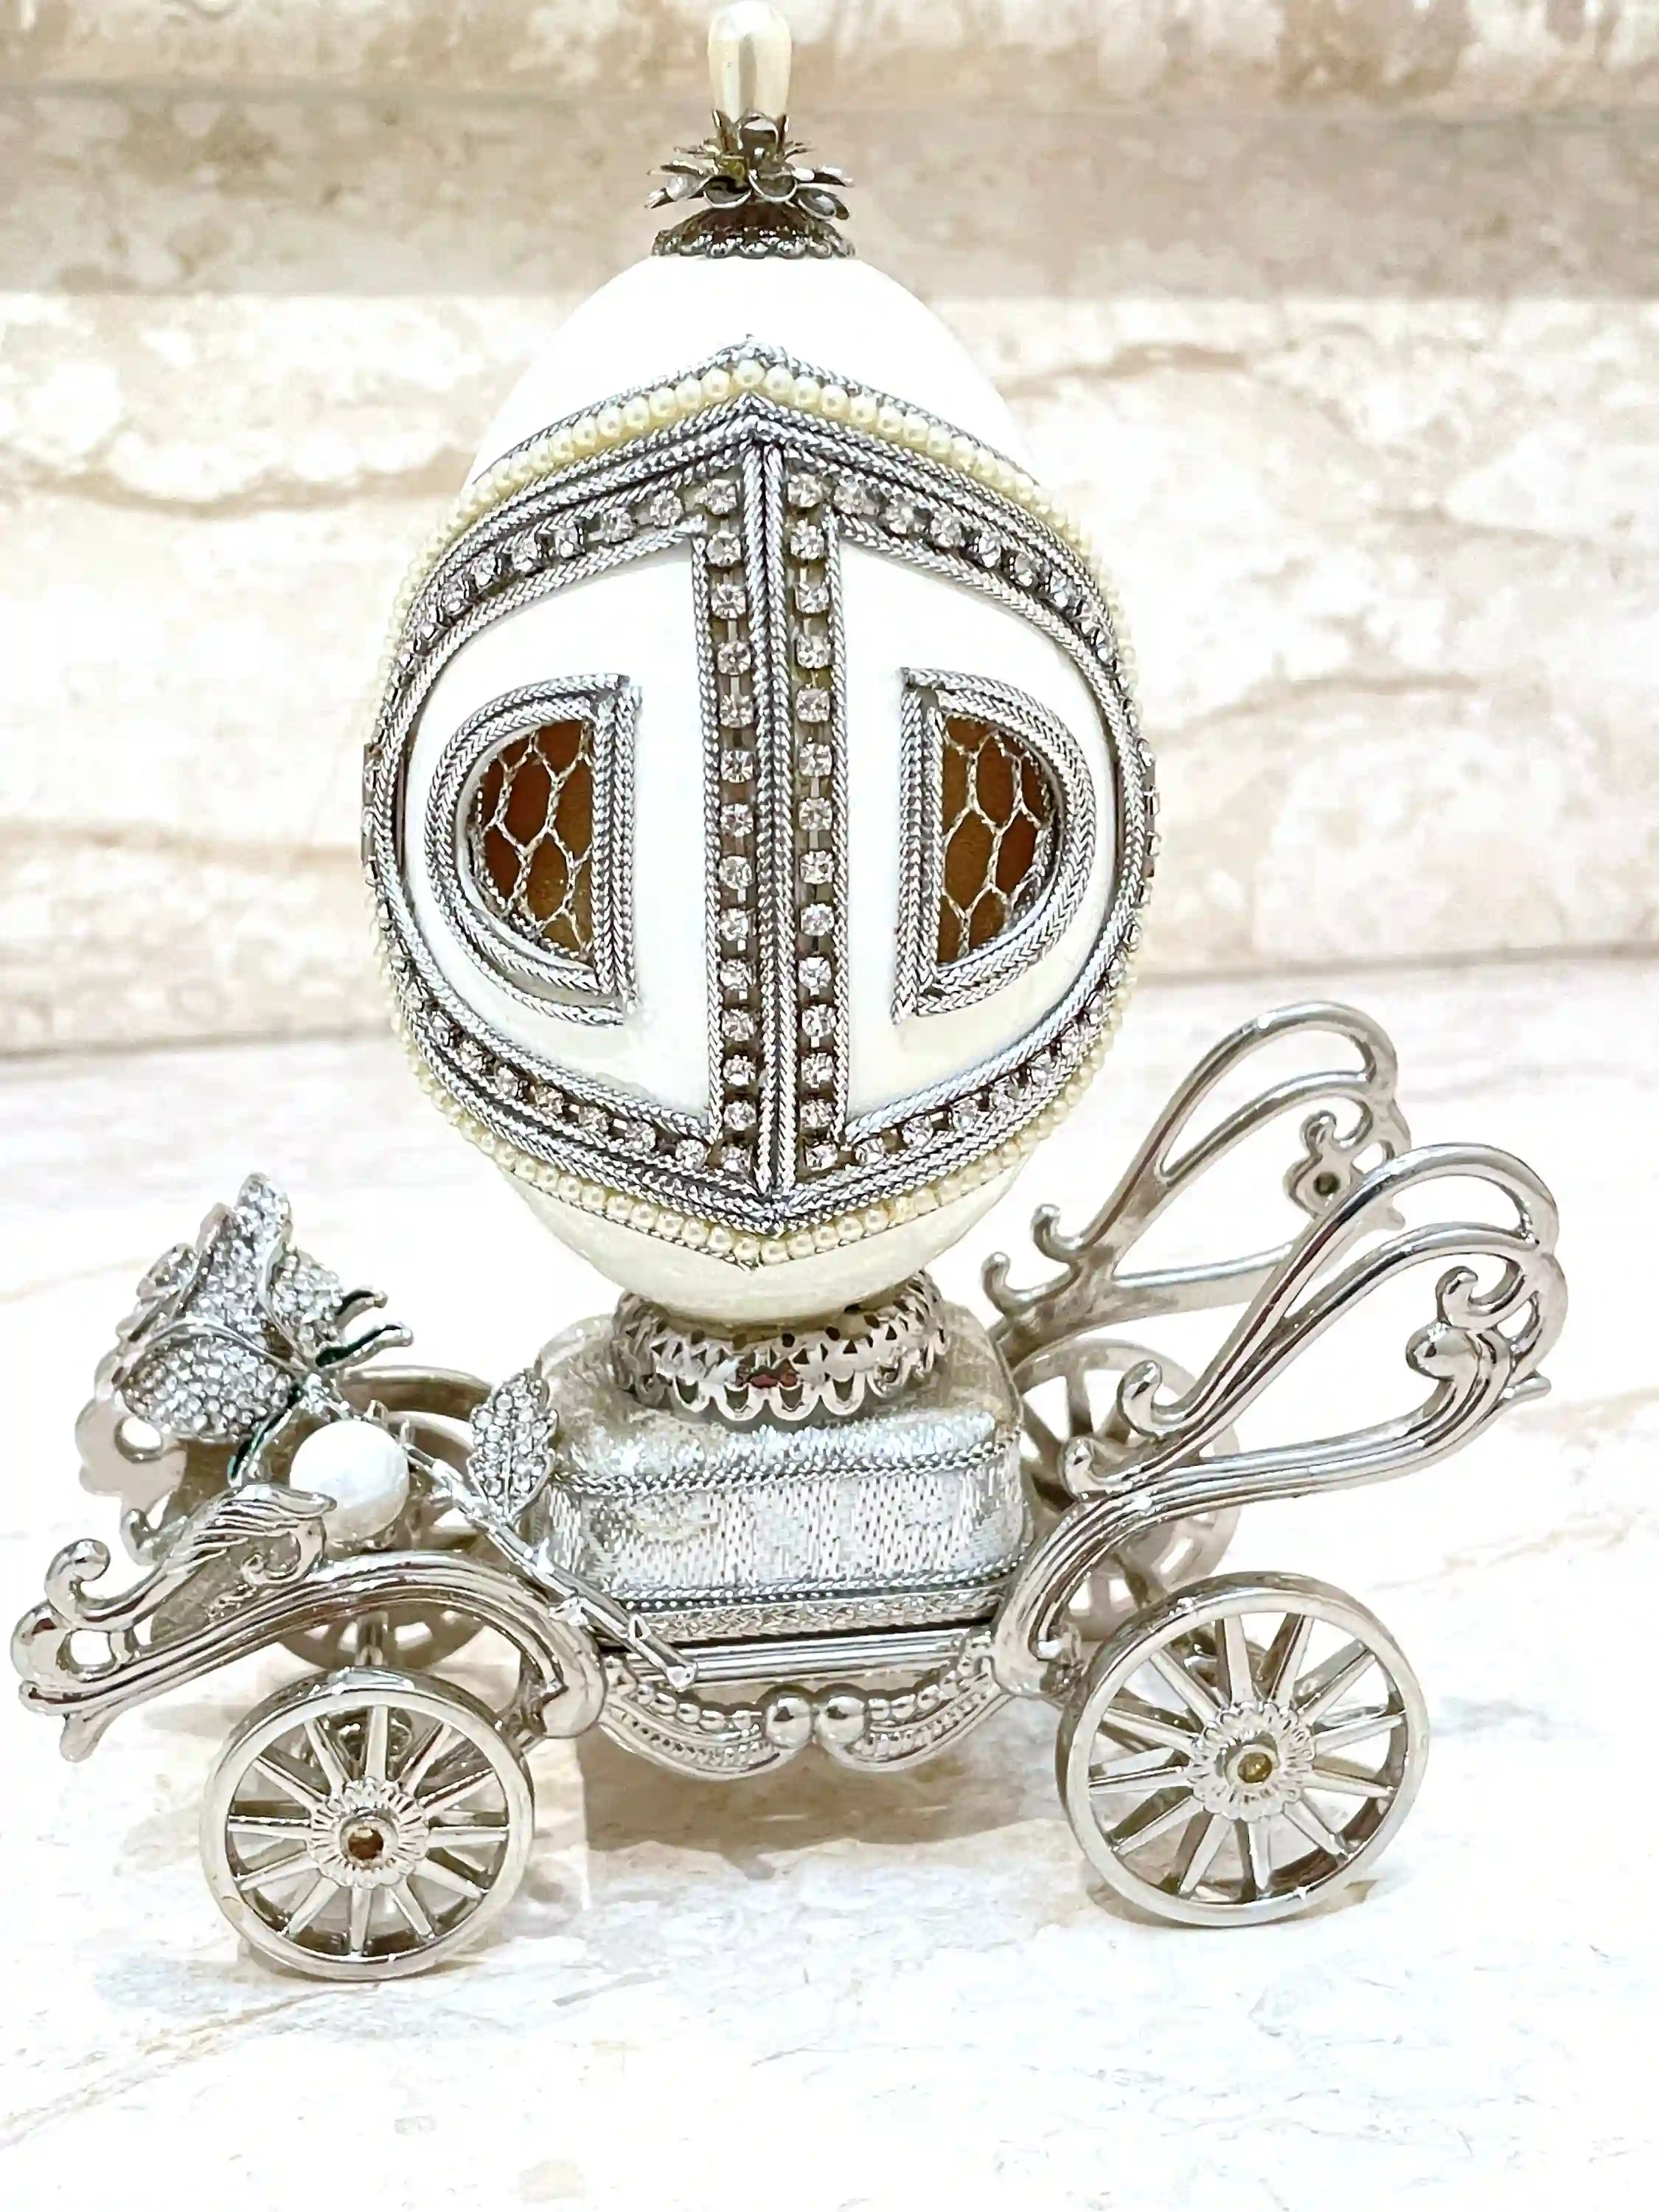 Faberge Egg Antique Imperial Faberge Style Egg 1989 Gift for wife 35year Anniversary gift Bride Wedding day Bridal shower gift for daughter 